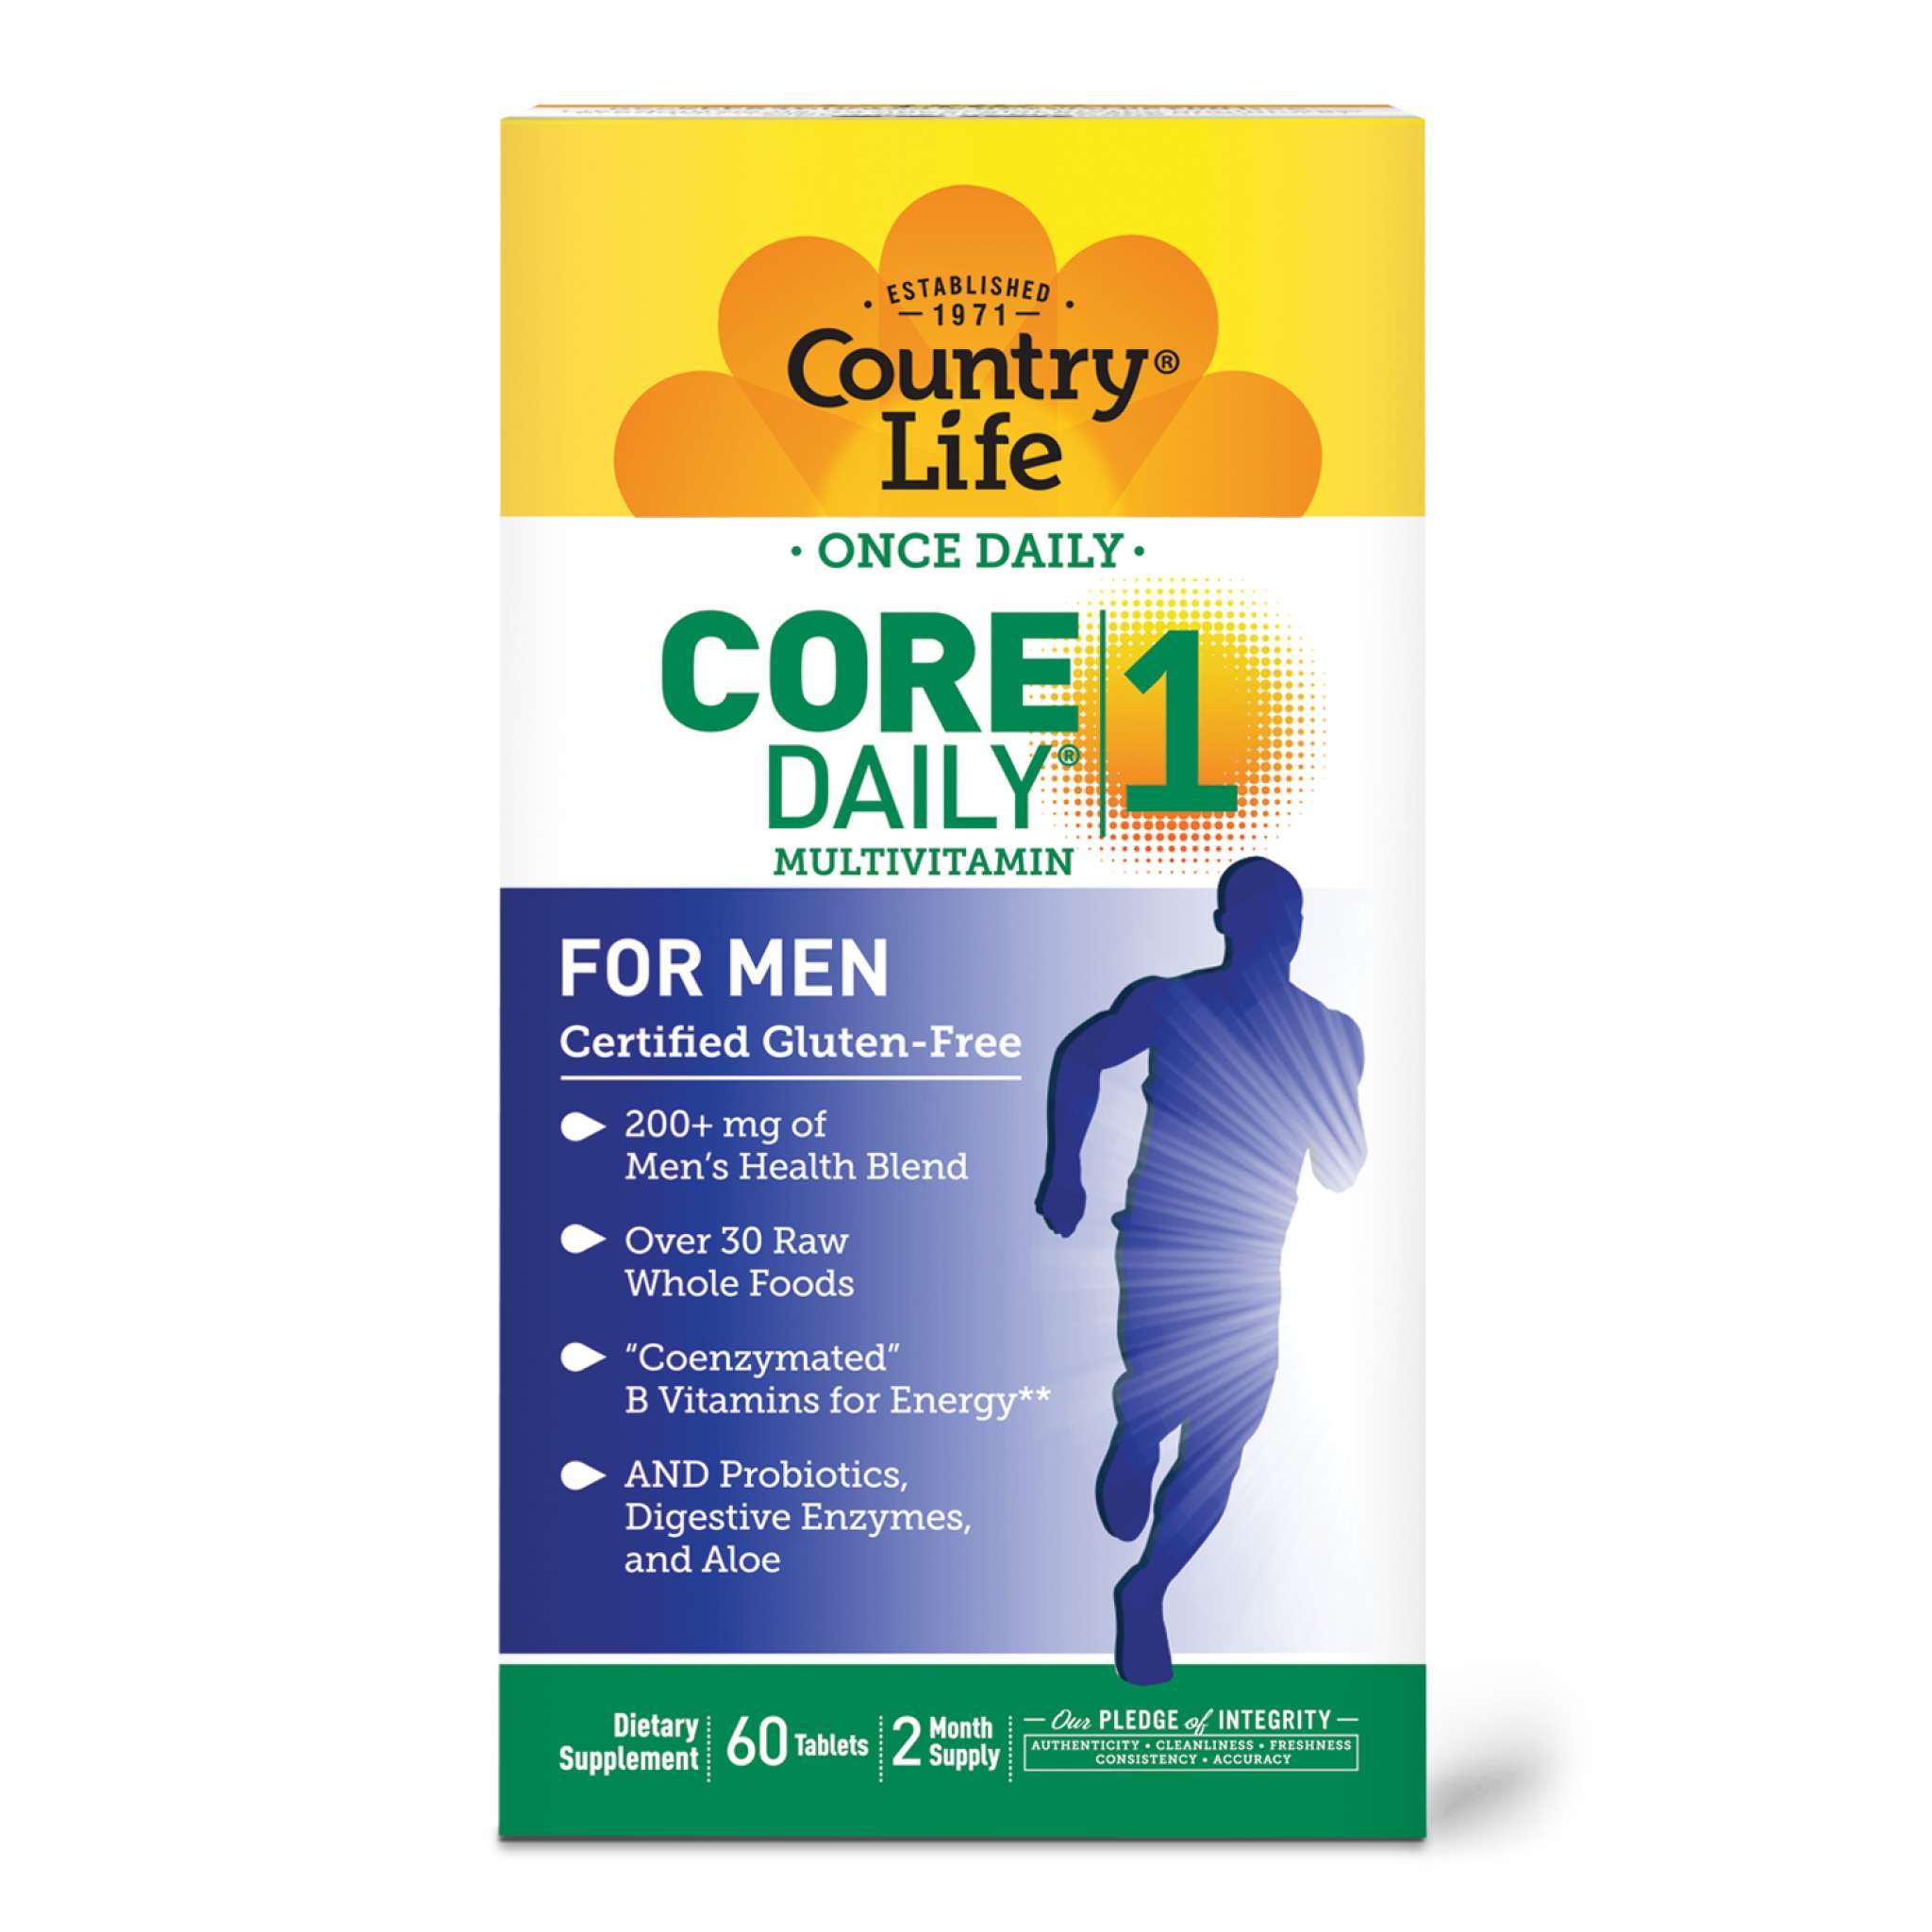 Country Life - Core Daily 1 For Men